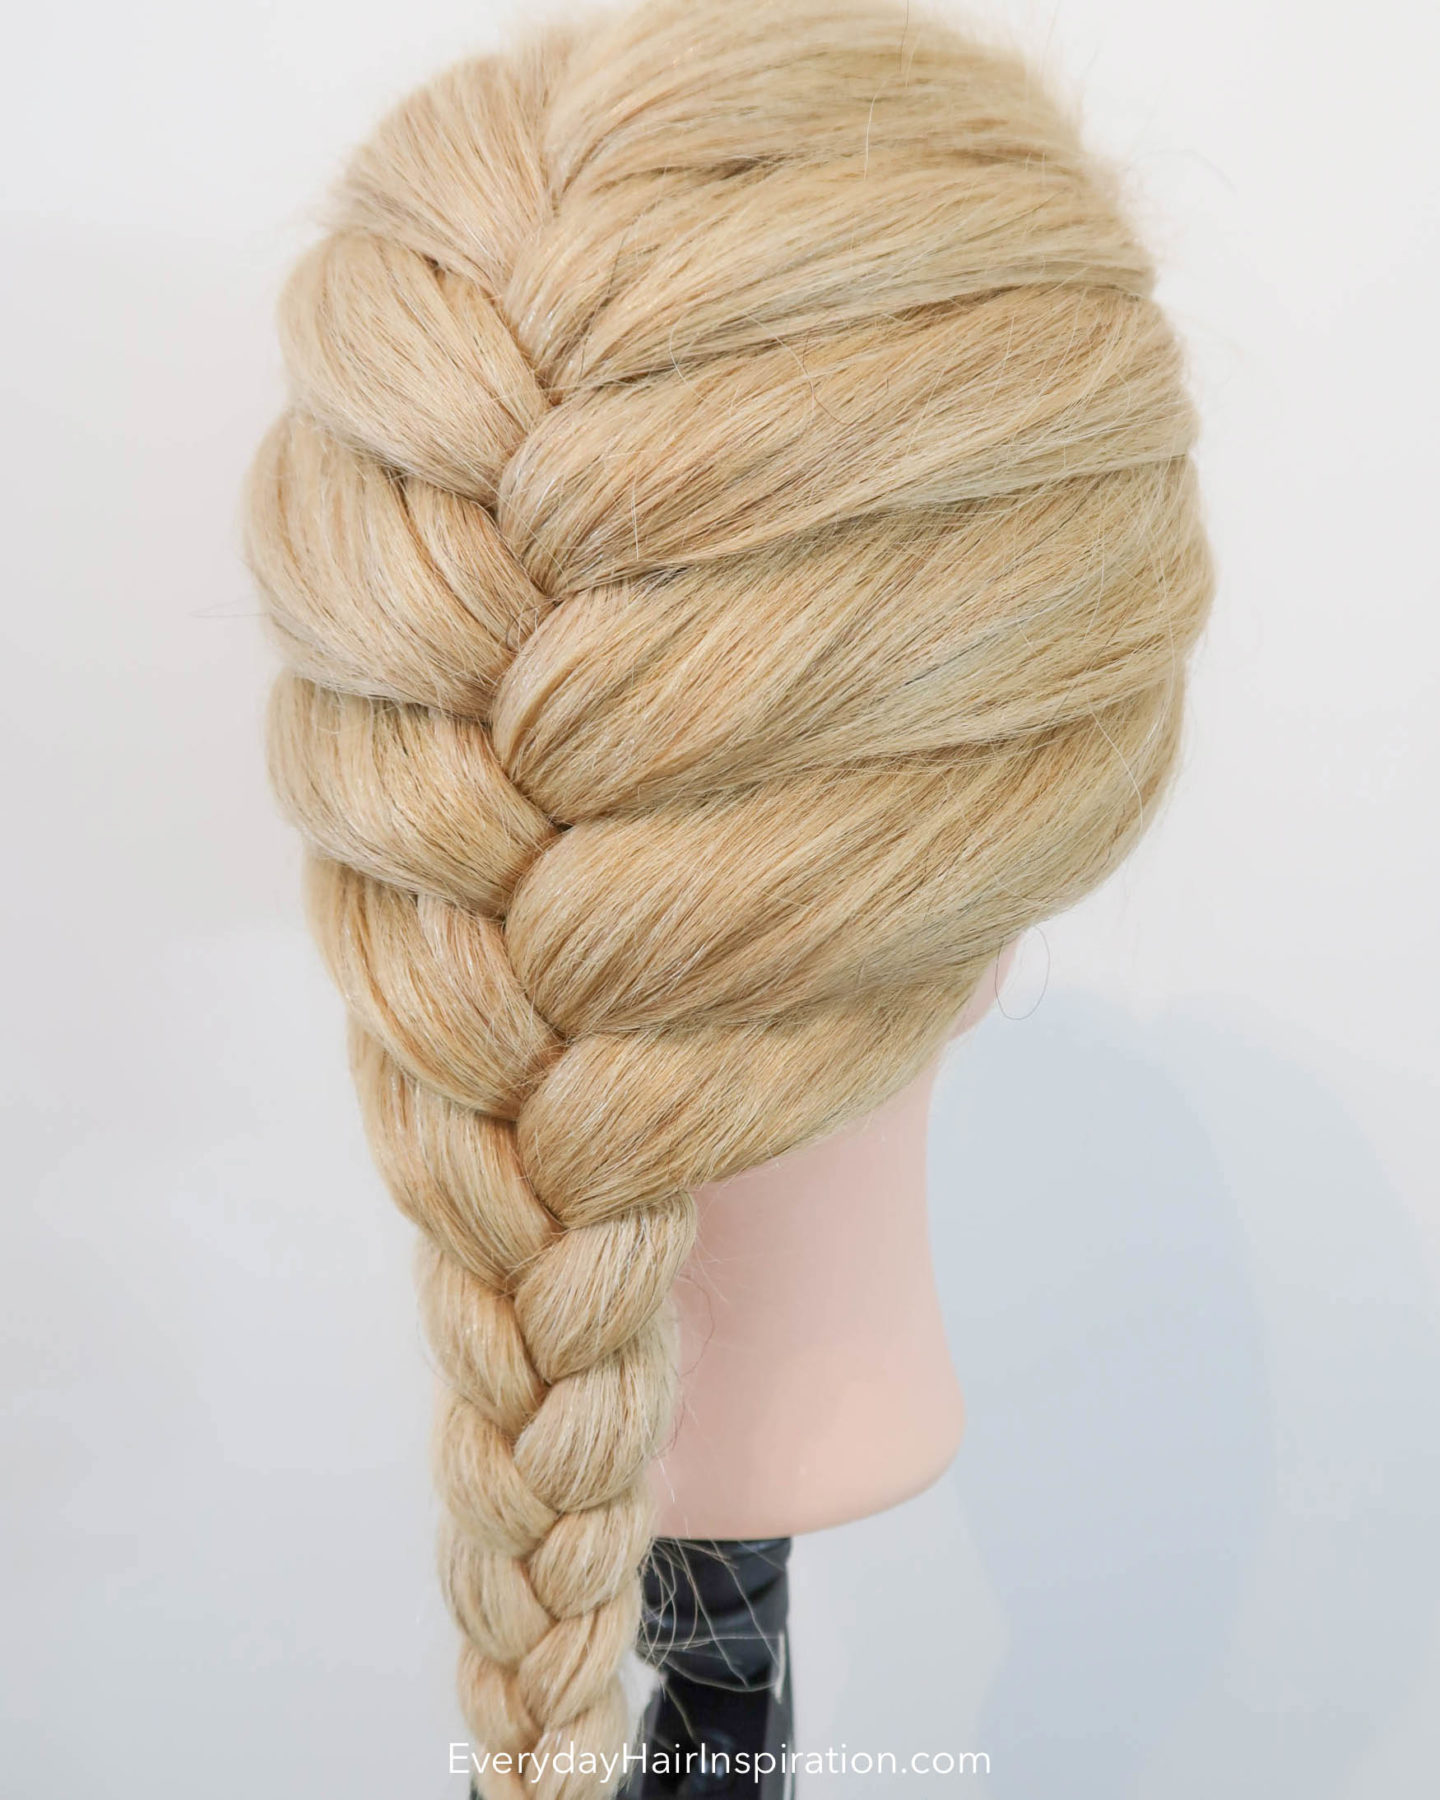 Blonde hairdresser doll. Slight side profile of a single French braid